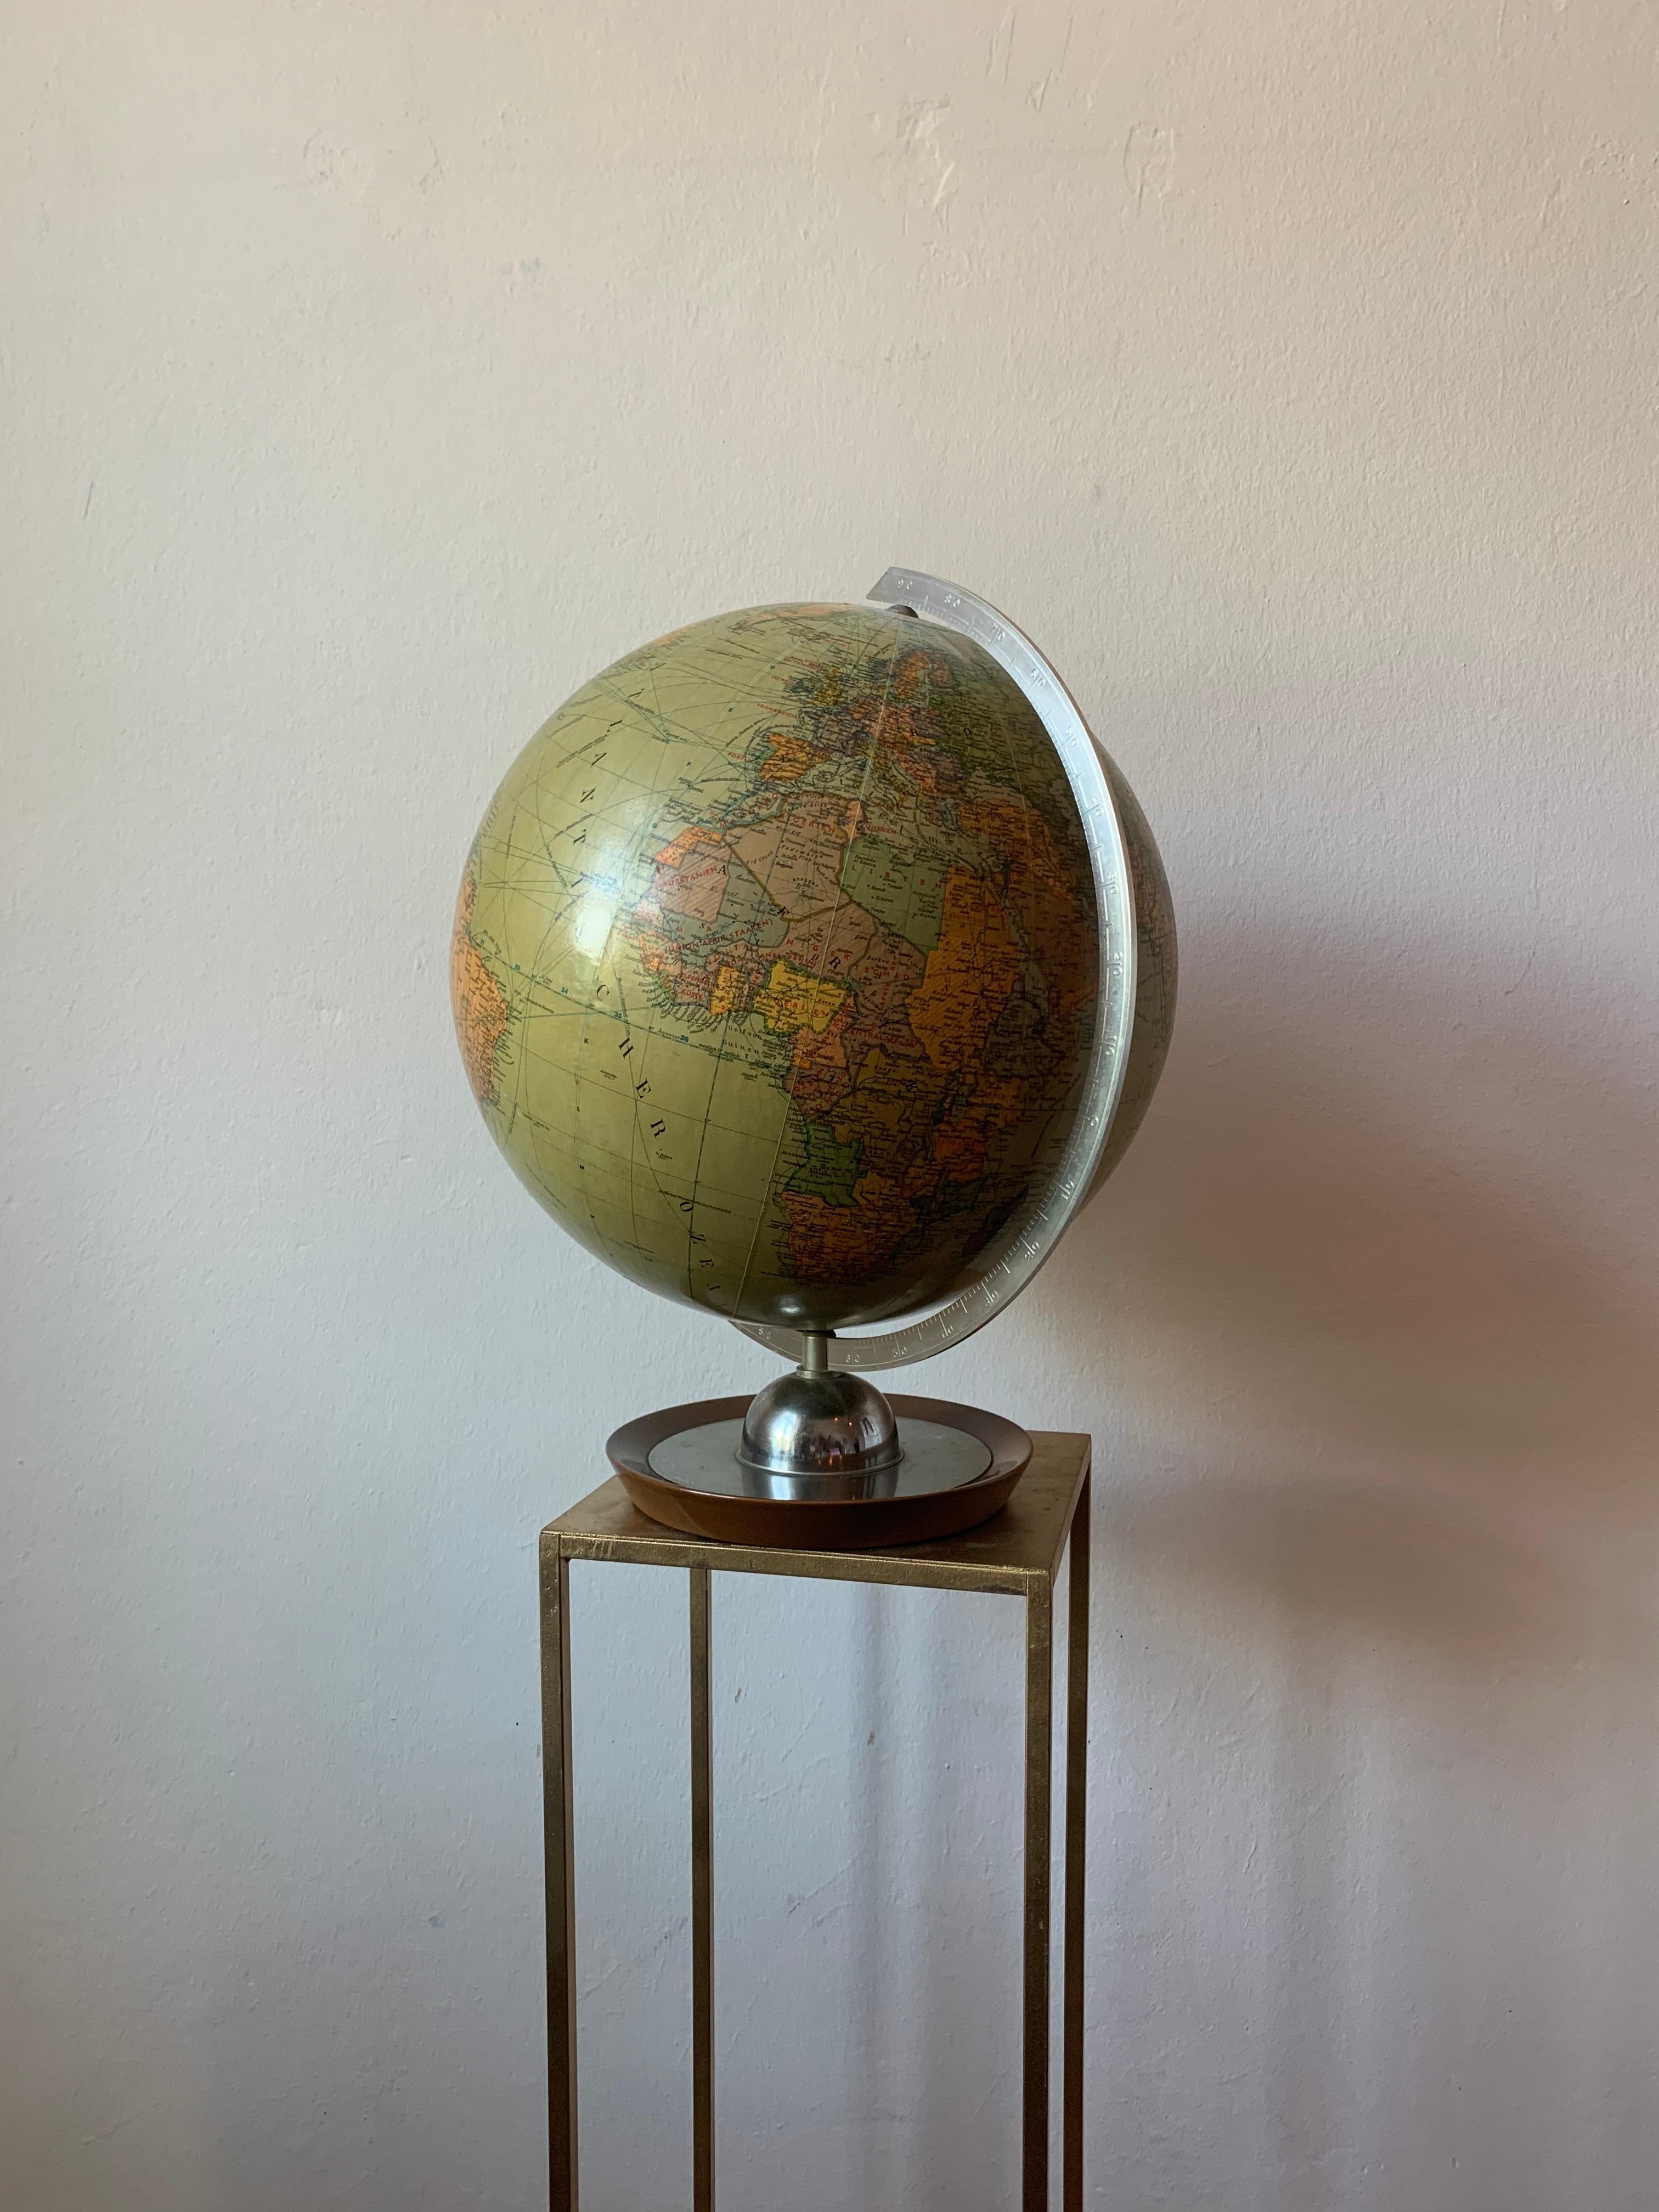 A simple and beautiful globe in a beautiful green color with countries showing a pre-war map of Germany.
Printed by JRO Globus printer based in Munich.
Slight scratches at bottom.